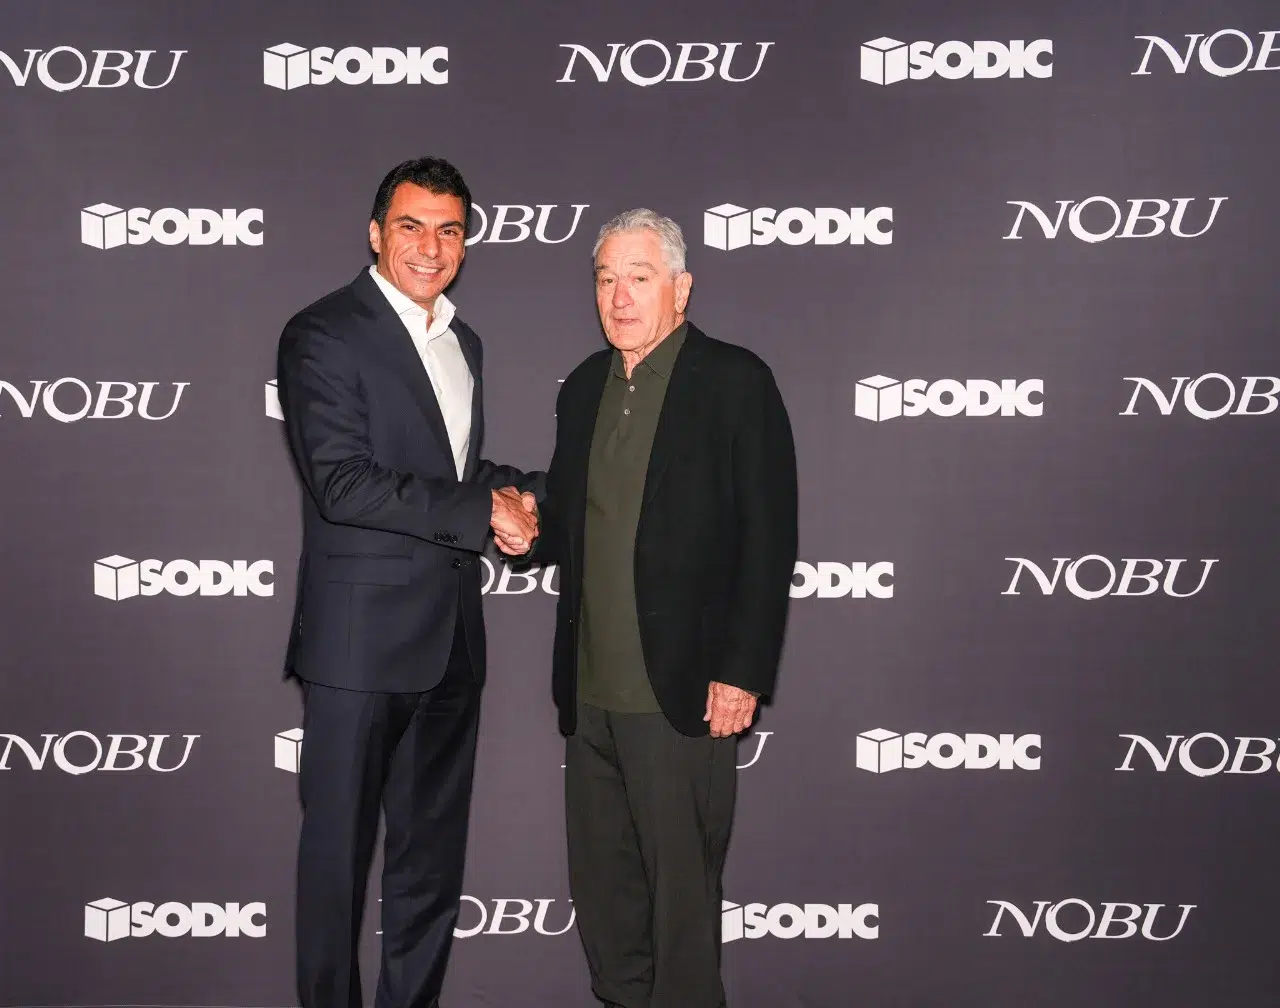 Robert De Niro in Egypt Nobu's Expansion with SODIC Transforms New Cairo's Eastown